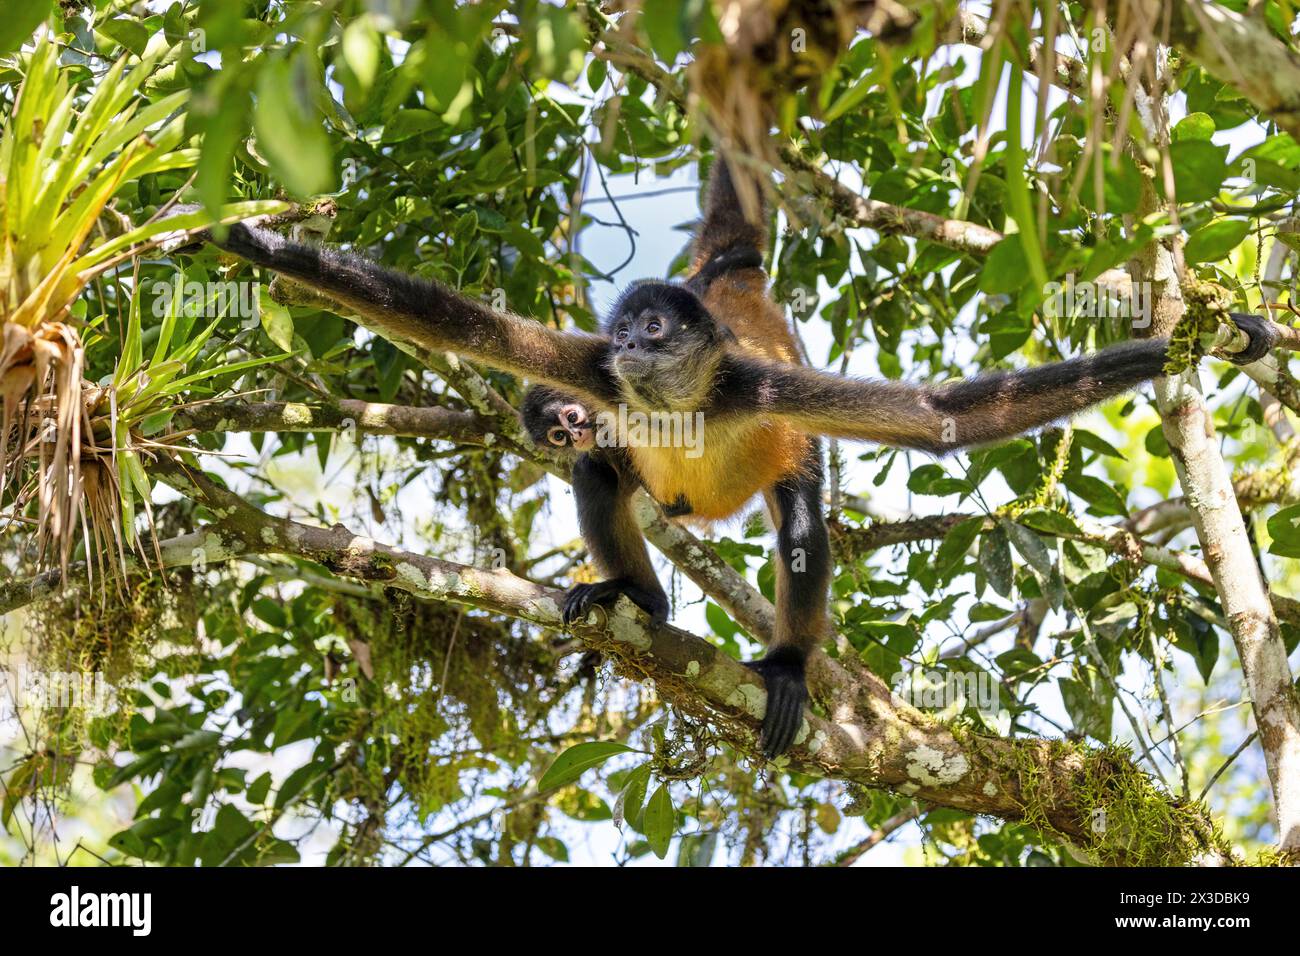 Geoffroy's spider monkey, Black-handed spider monkey, Central American spider monkey (Ateles geoffroyi), climbs in the rainforest with pup, Costa Rica Stock Photo